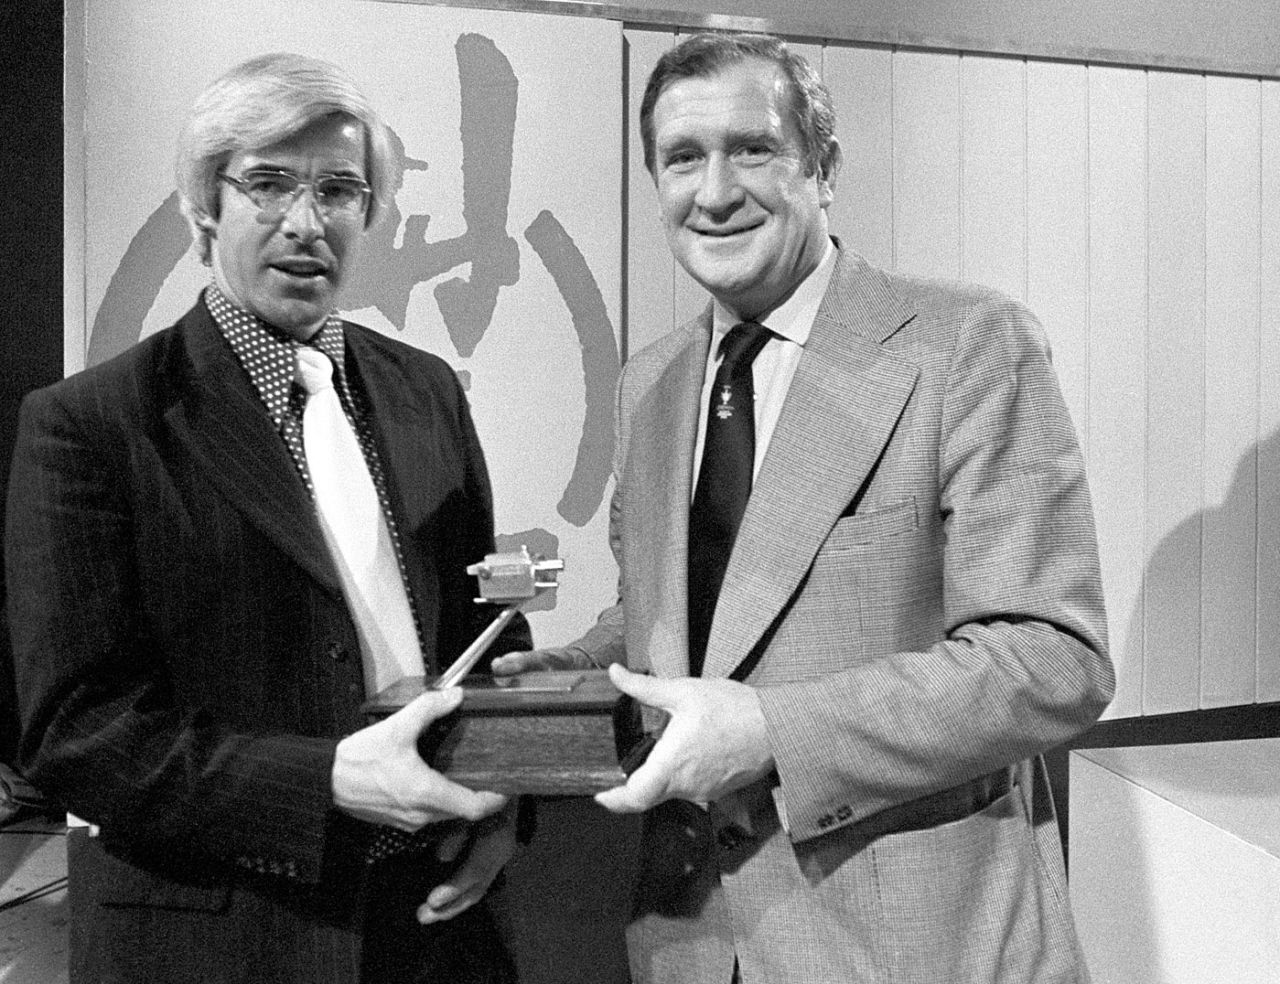 David Steele receives the BBC TV Grandstand Cricketer of the Year award from Jim Laker, England, October 26, 1975